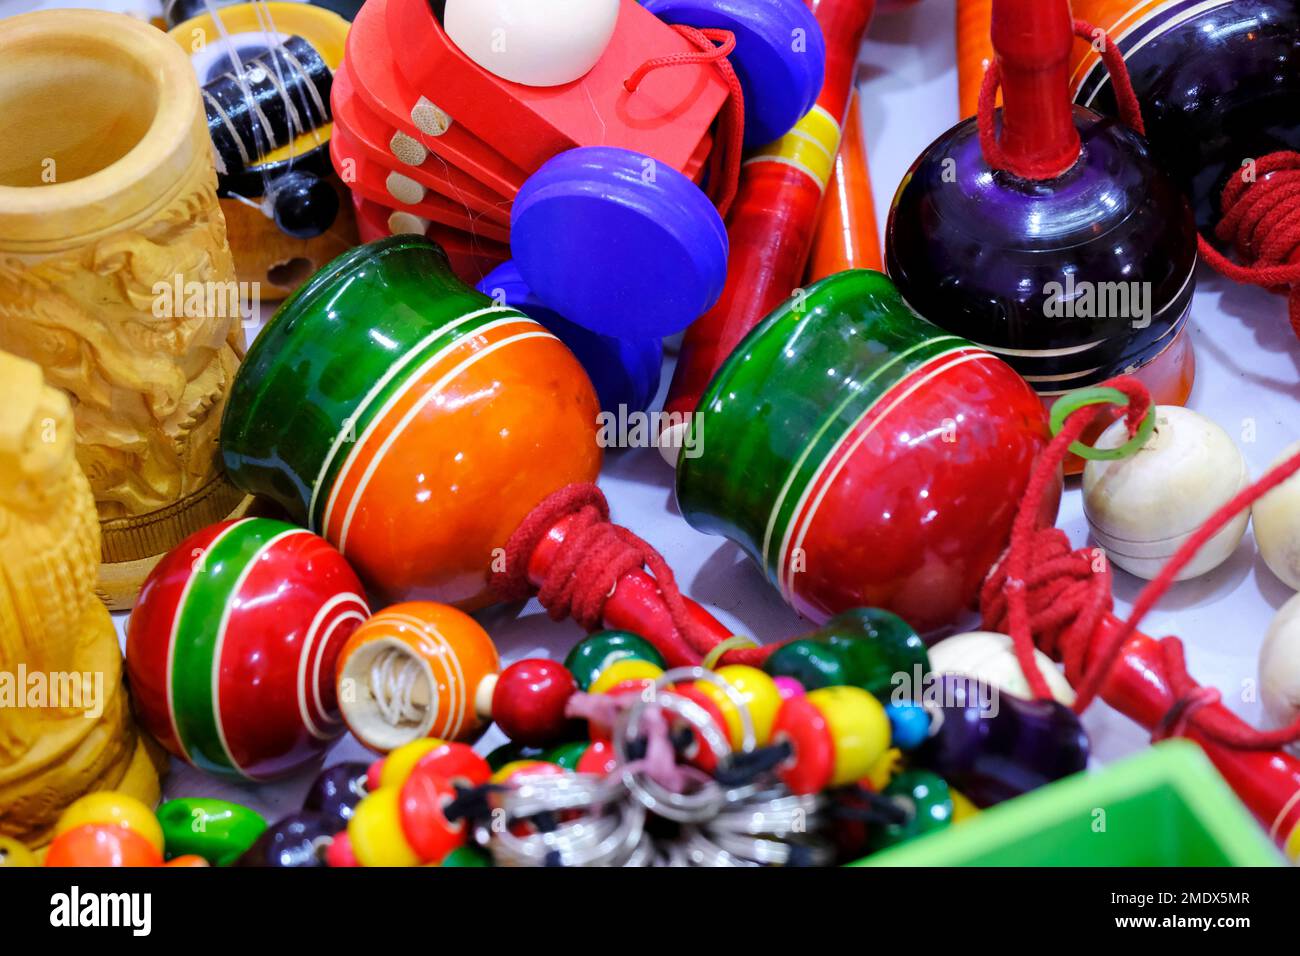 Traditional handmade Colorful toys made from wood, wooden toys, family, selective focus. Stock Photo